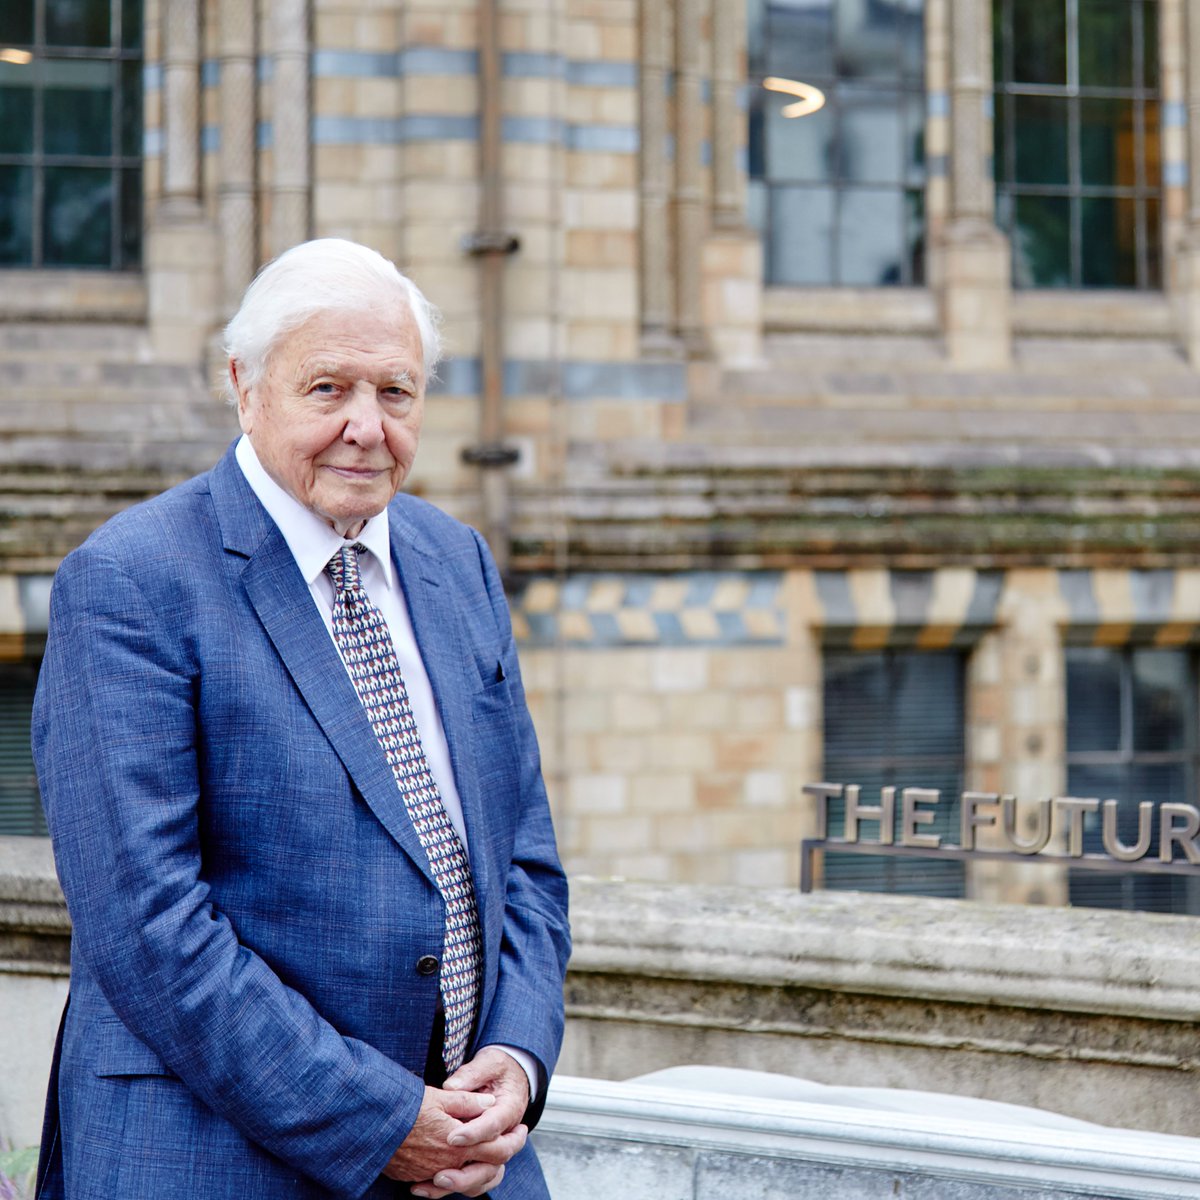 “The future of the natural world, on which we all depend, is in our hands”. 🌍 Happy 98th birthday to Sir David Attenborough, who unveiled his powerful quote @NHM_London last year as part of the #NationalLottery supported #UrbanNatureProject.